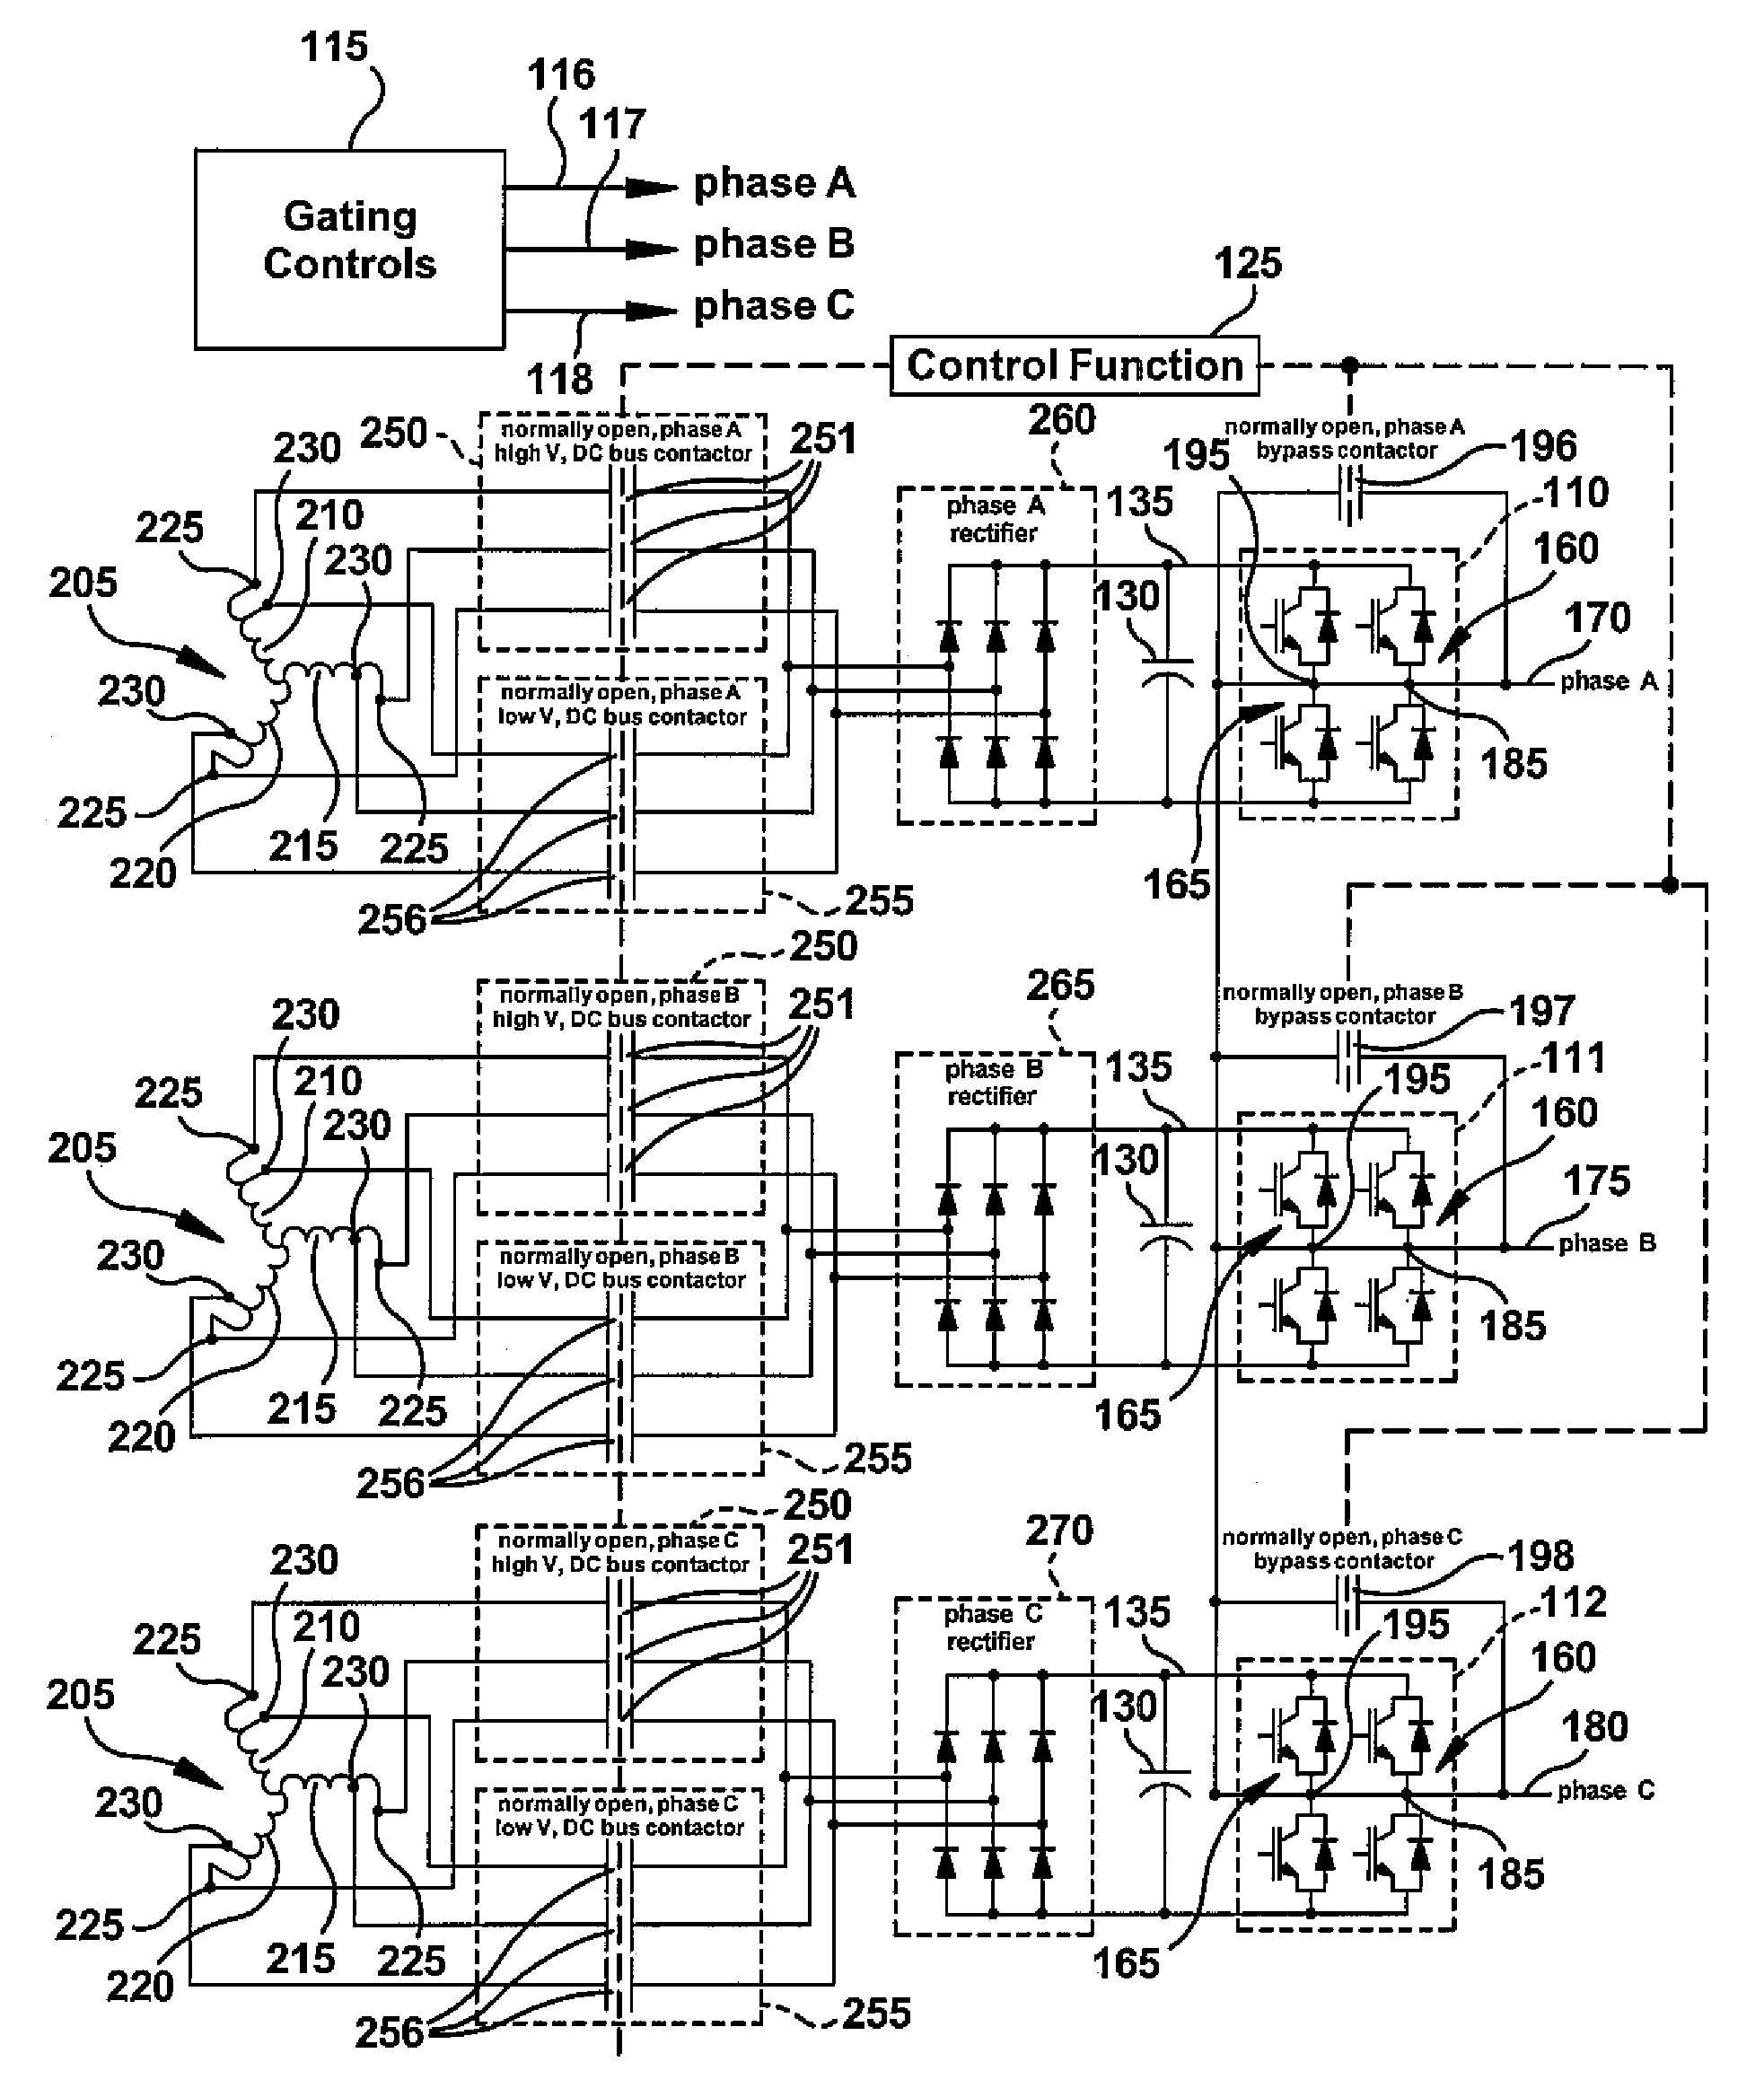 Dual voltage wye-connected H-bridge converter topology for powering a high-speed electric motor